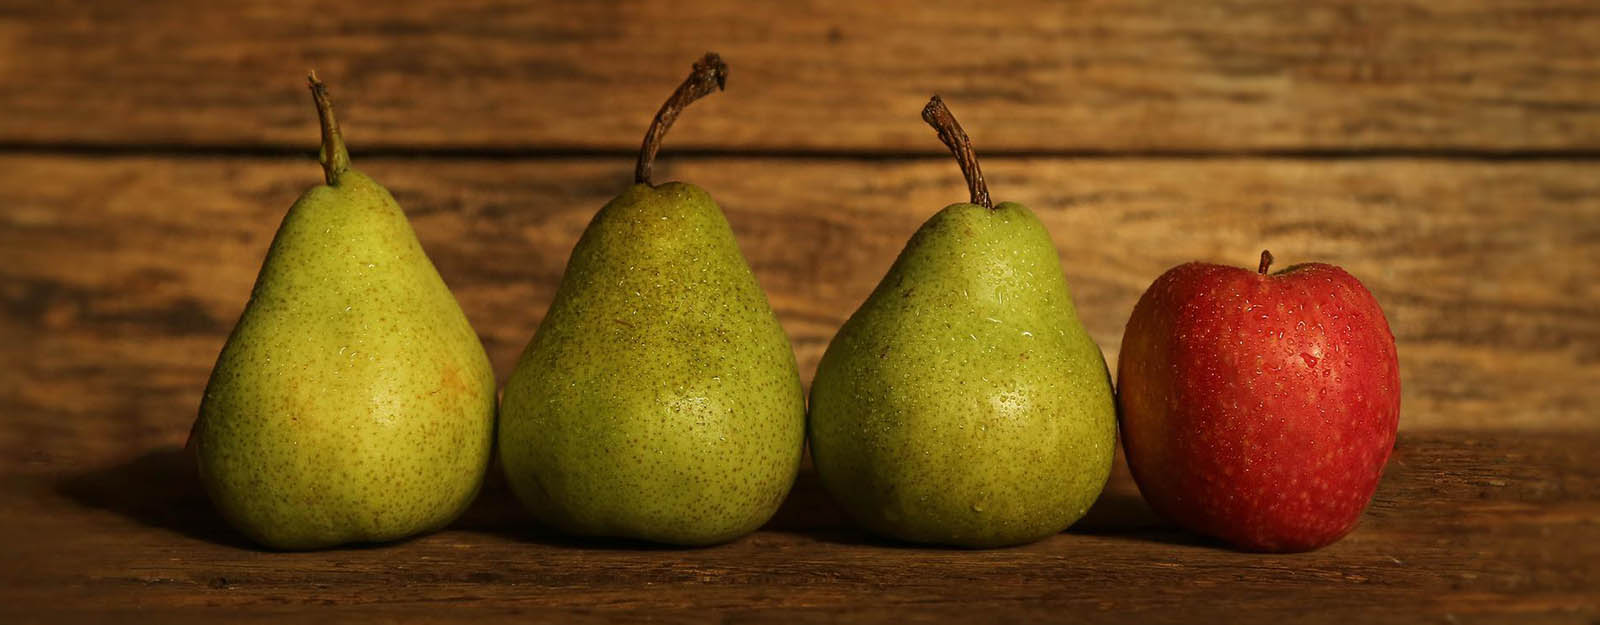 Union State Bank commercial services and business loans. Image of three pears and one apple.